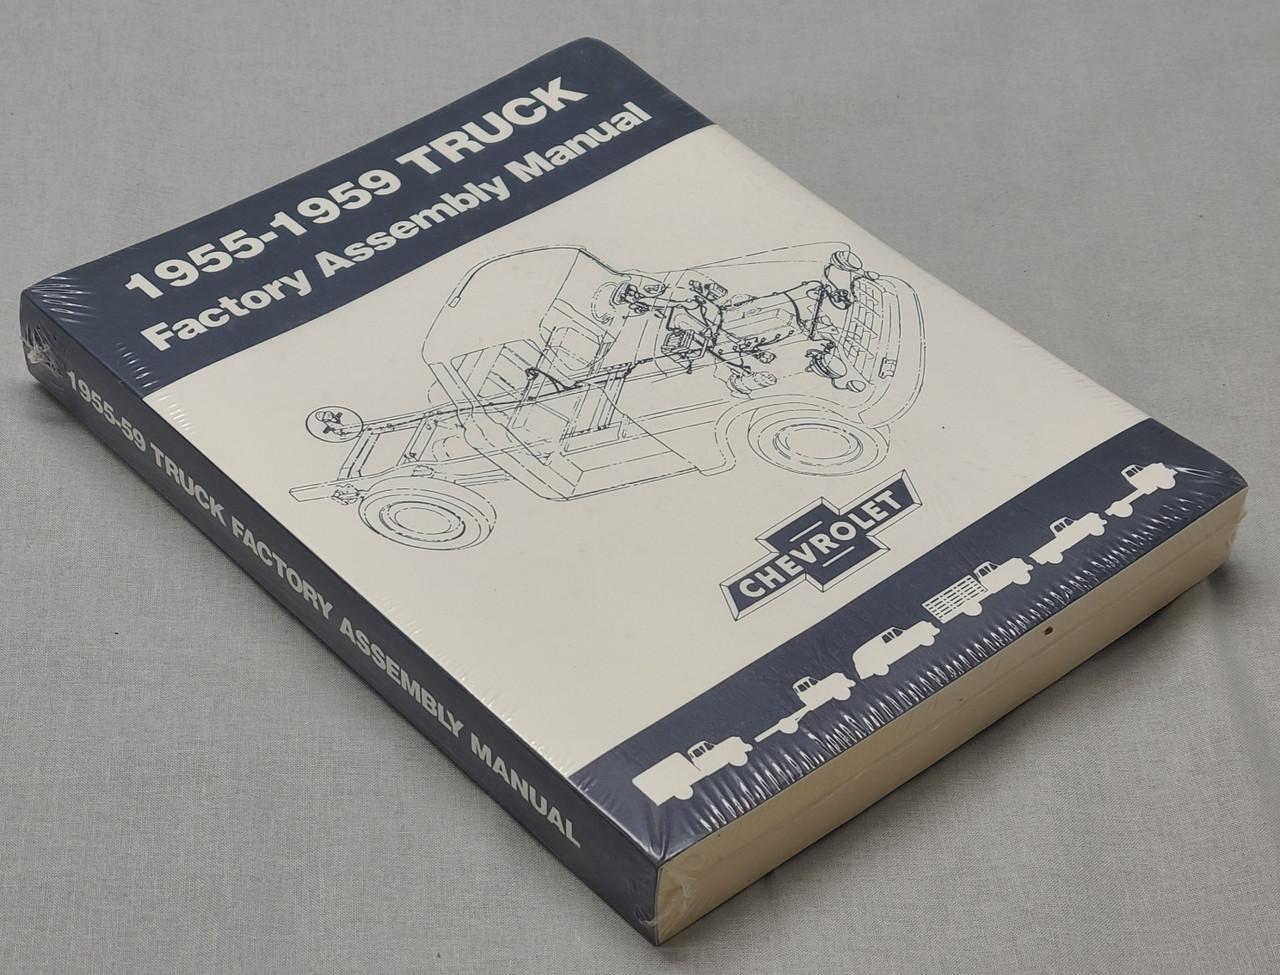 1955-1959 Truck Factory Assembly Manual - NEW